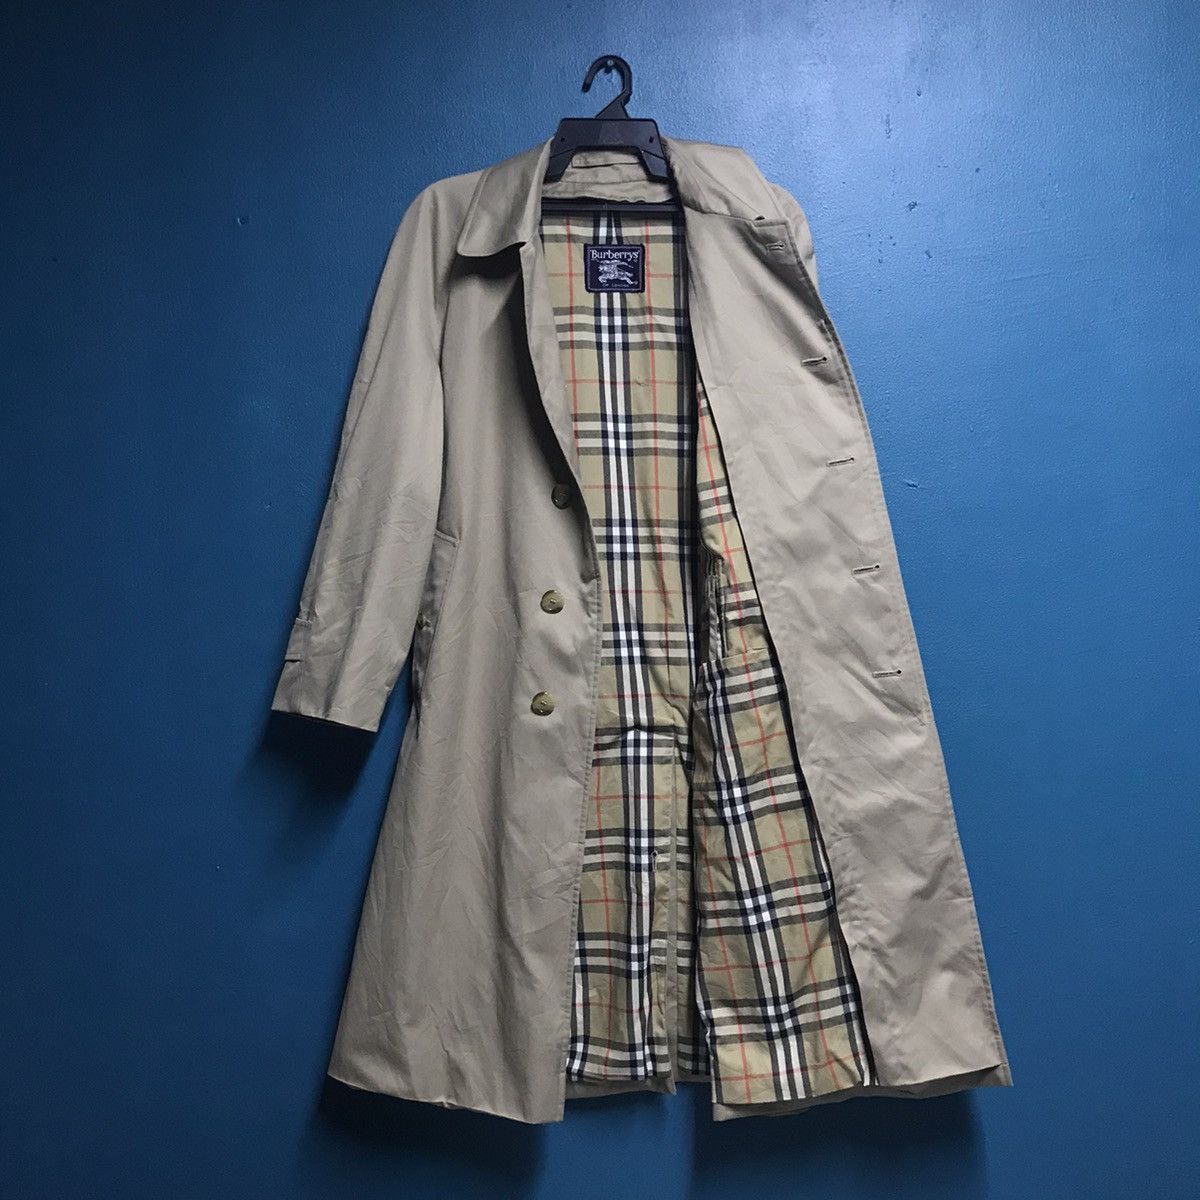 Burberry Prorsum Vintage burberry nova check trench coat with wool lining Size US L / EU 52-54 / 3 - 2 Preview